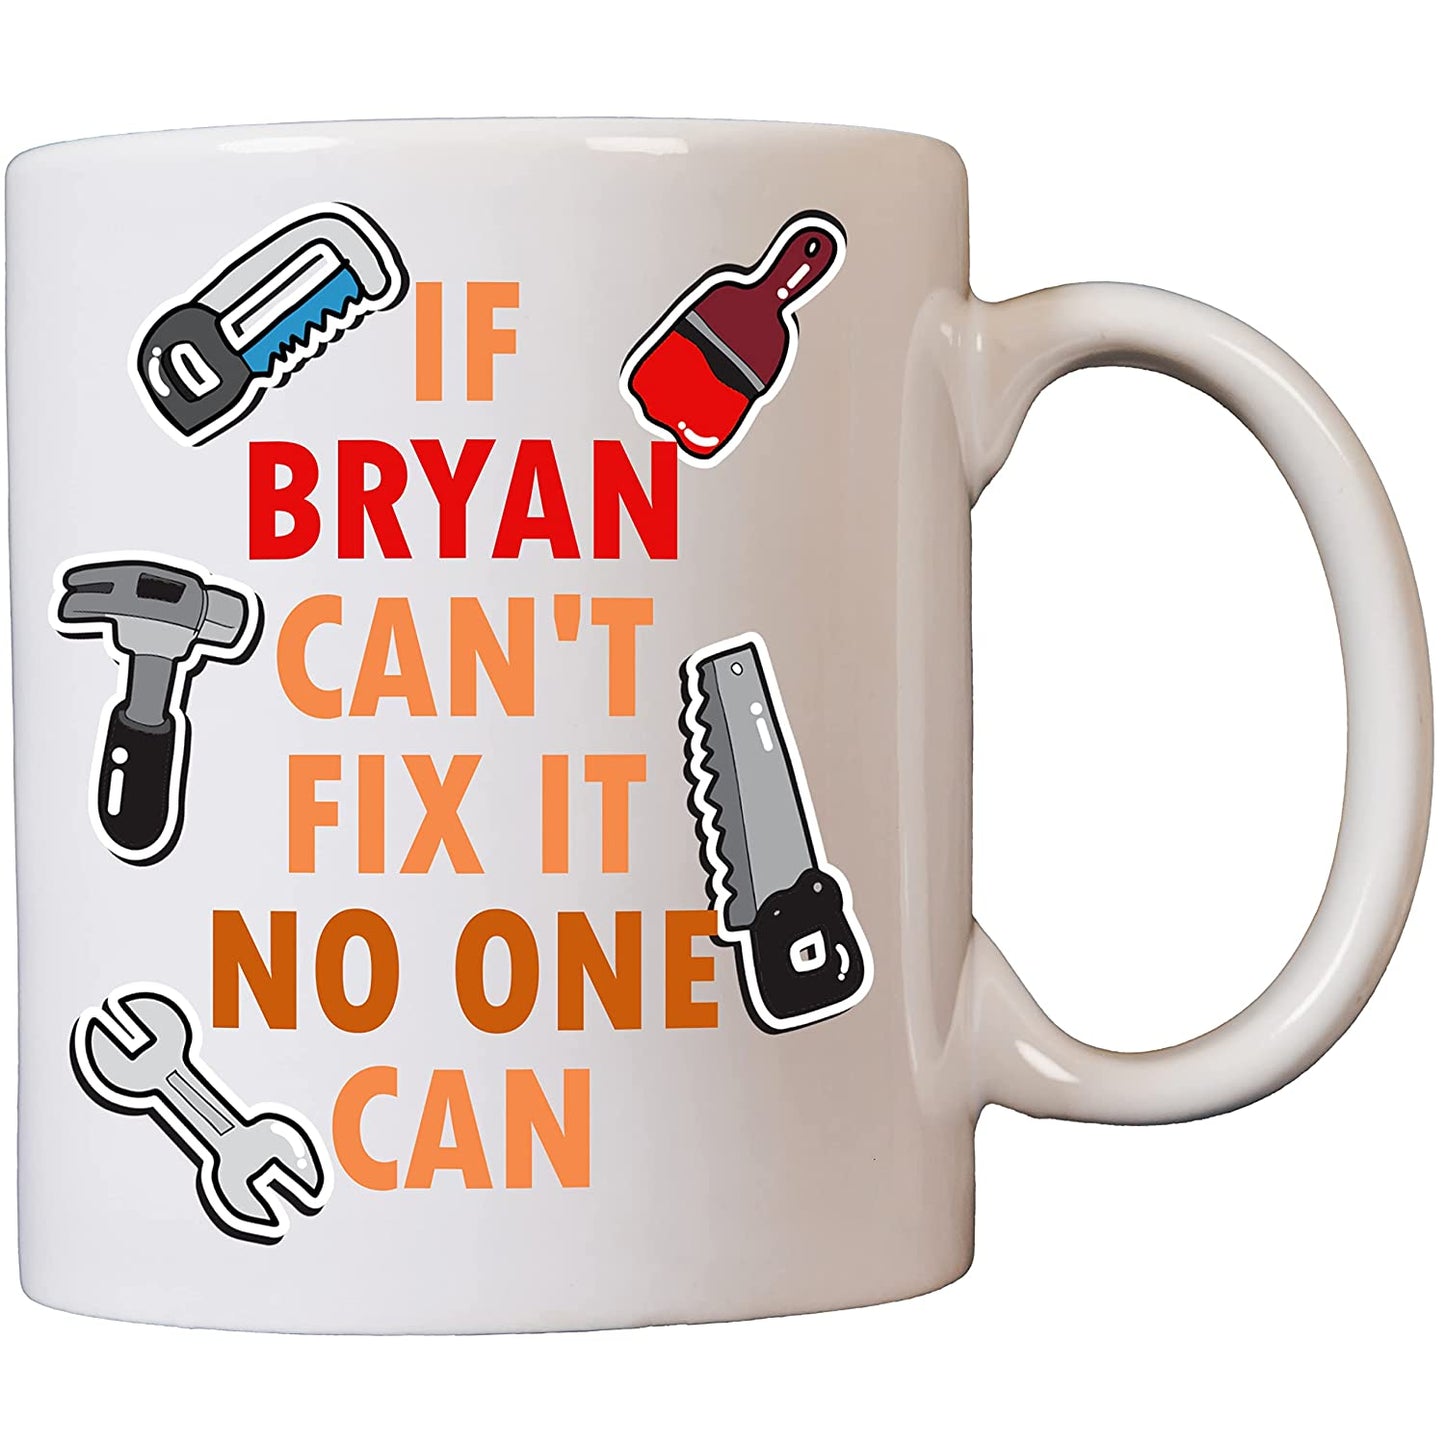 If (Name) Can't Fix It No One Can Personalised Mug for Handymen, builders, carpenters, painters, mechanics 11oz Dishwasher & Microwave safe